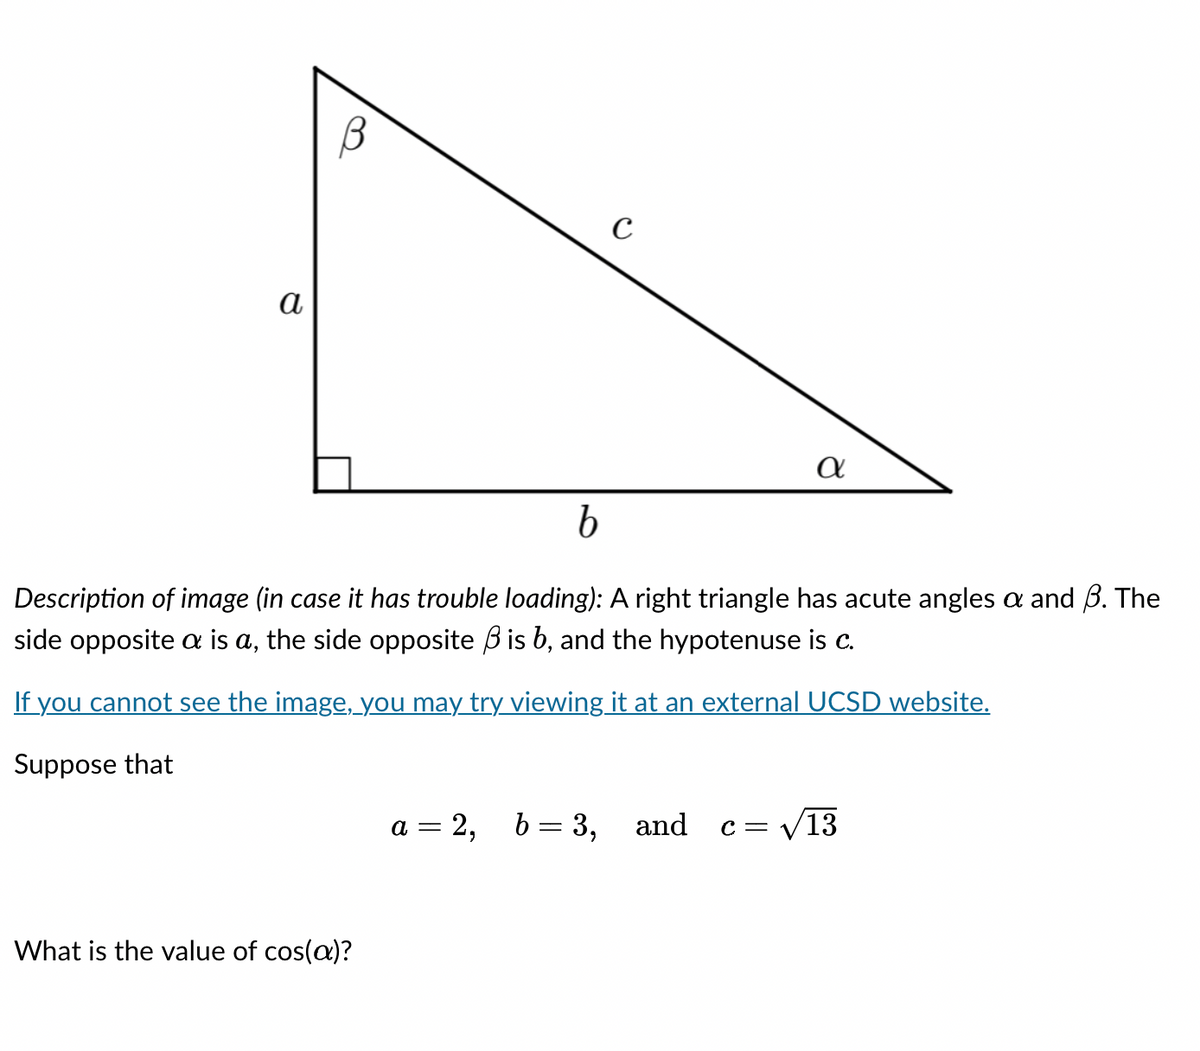 α
What is the value of cos(a)?
с
b
Description of image (in case it has trouble loading): A right triangle has acute angles a and B. The
side opposite a is a, the side opposite is b, and the hypotenuse is c.
If you cannot see the image, you may try viewing it at an external UCSD website.
Suppose that
a = 2, b = 3,
α
and
c=√13